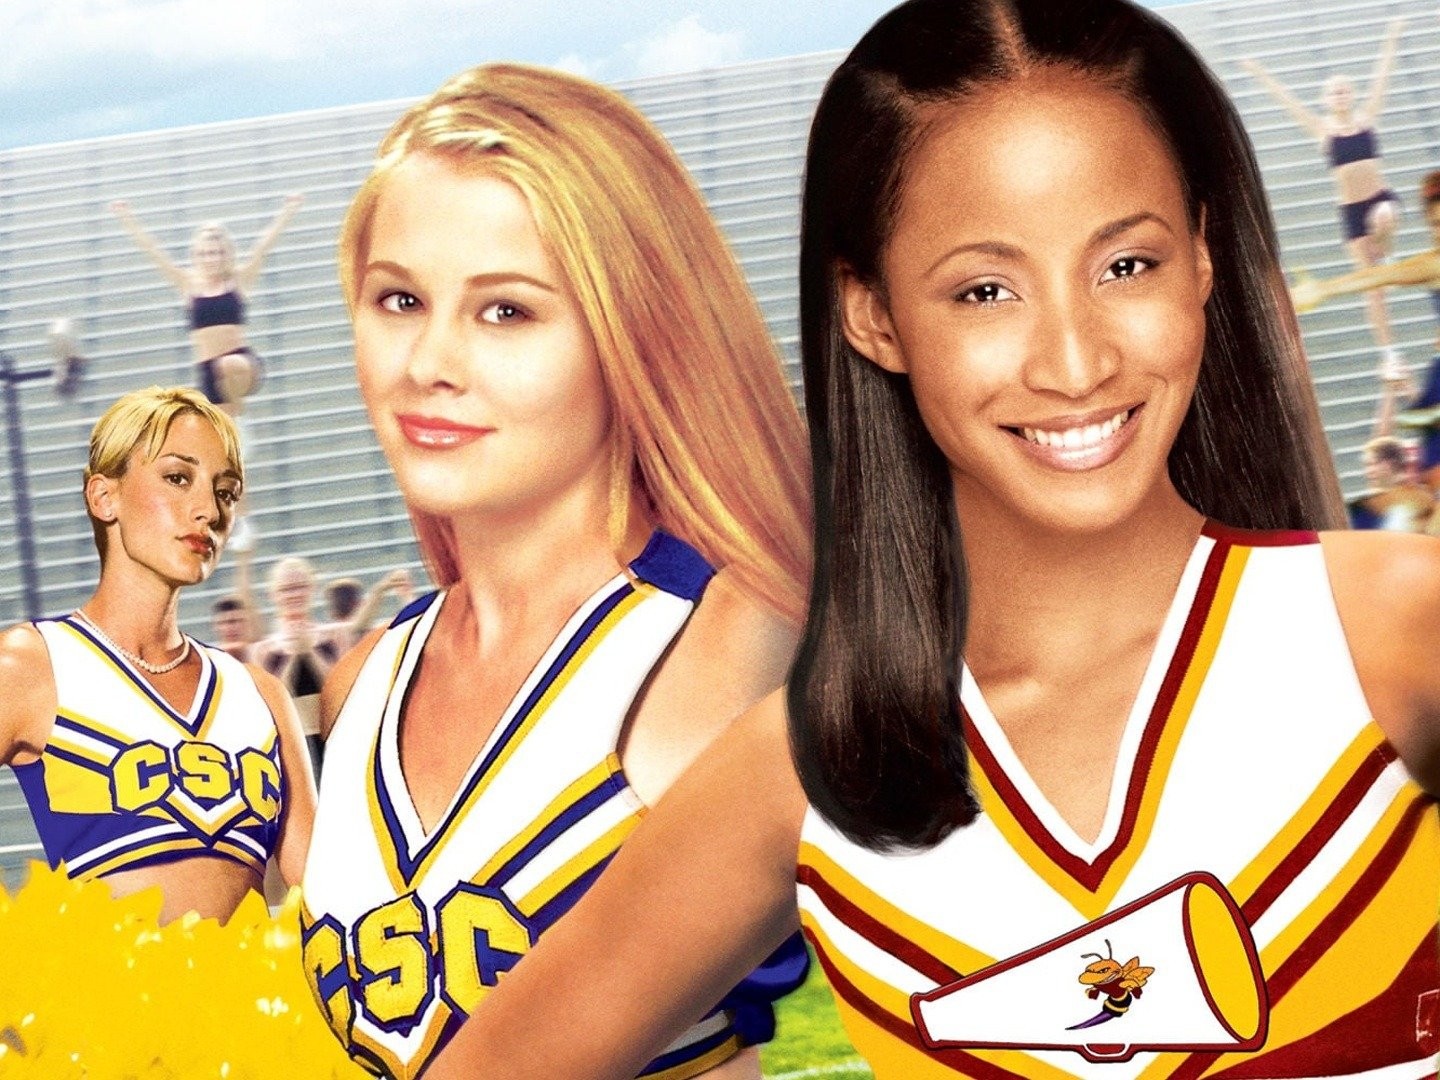 School Spirit: Every 'Bring it On' Movie, Ranked According To Rotten  Tomatoes